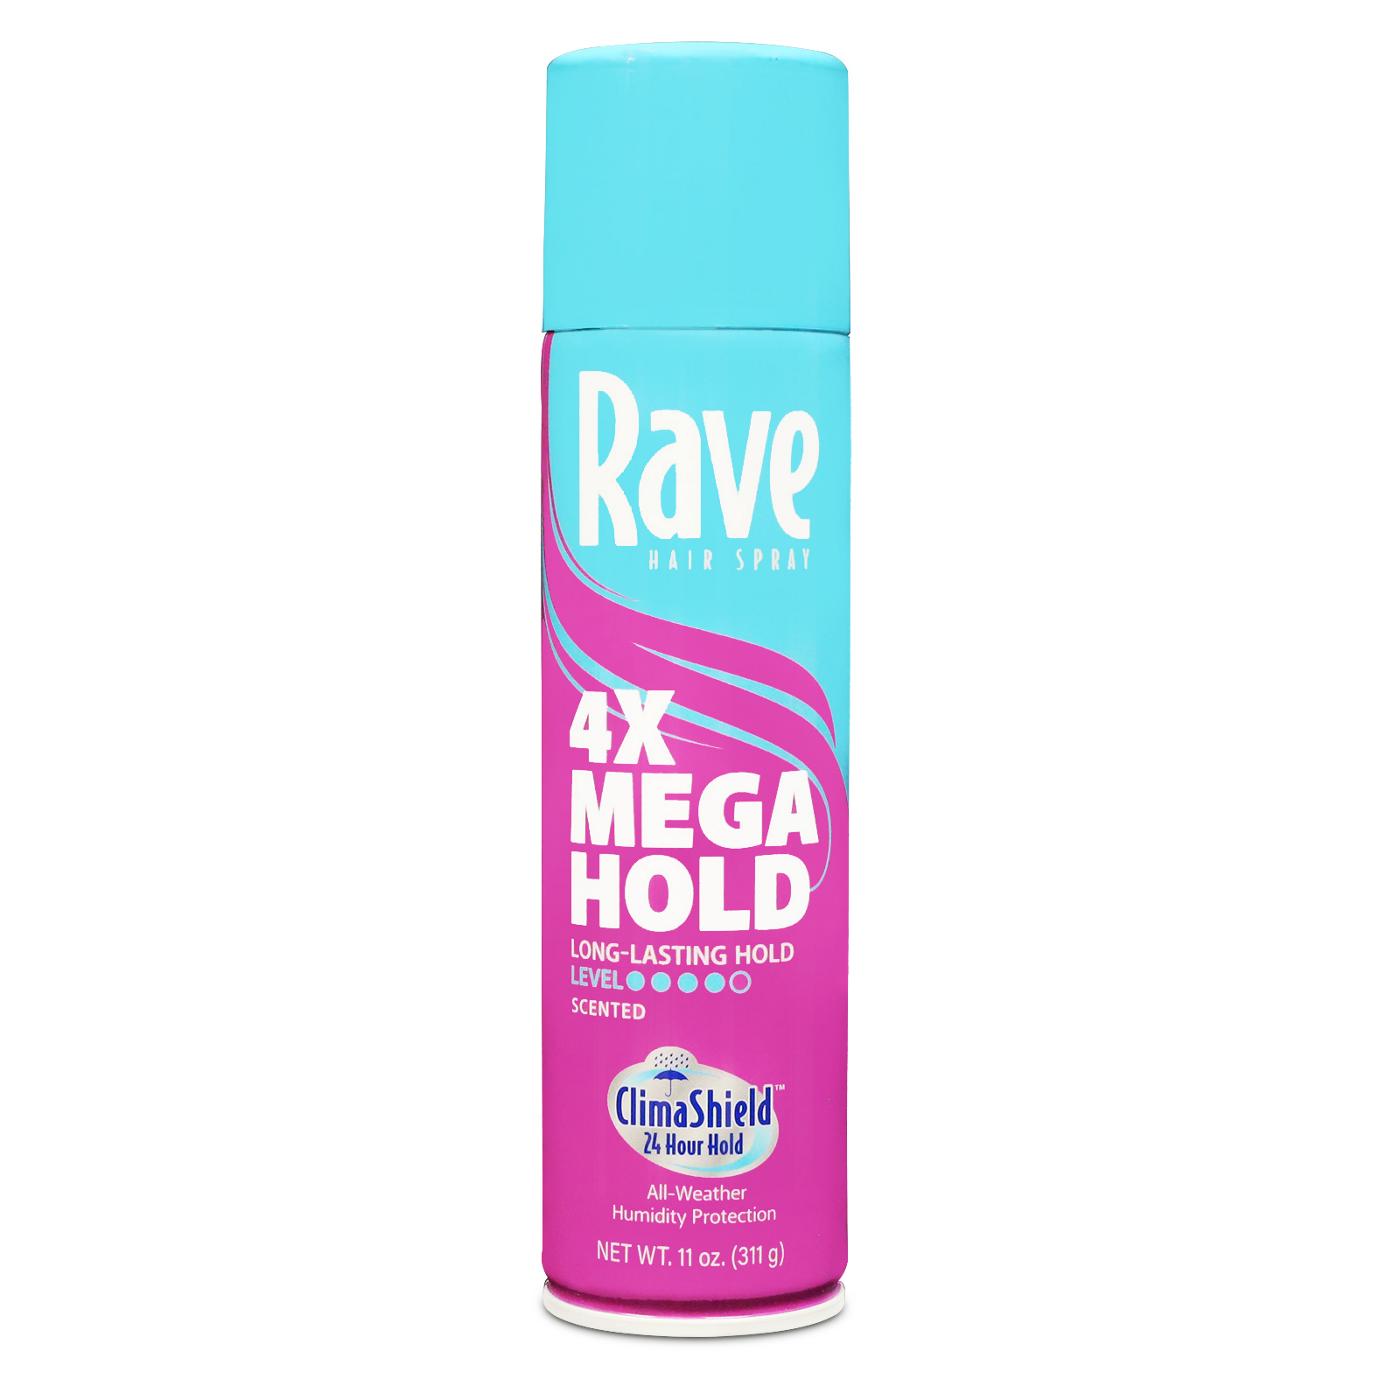 Rave 4X Mega Hold Scented Hair Spray; image 1 of 2